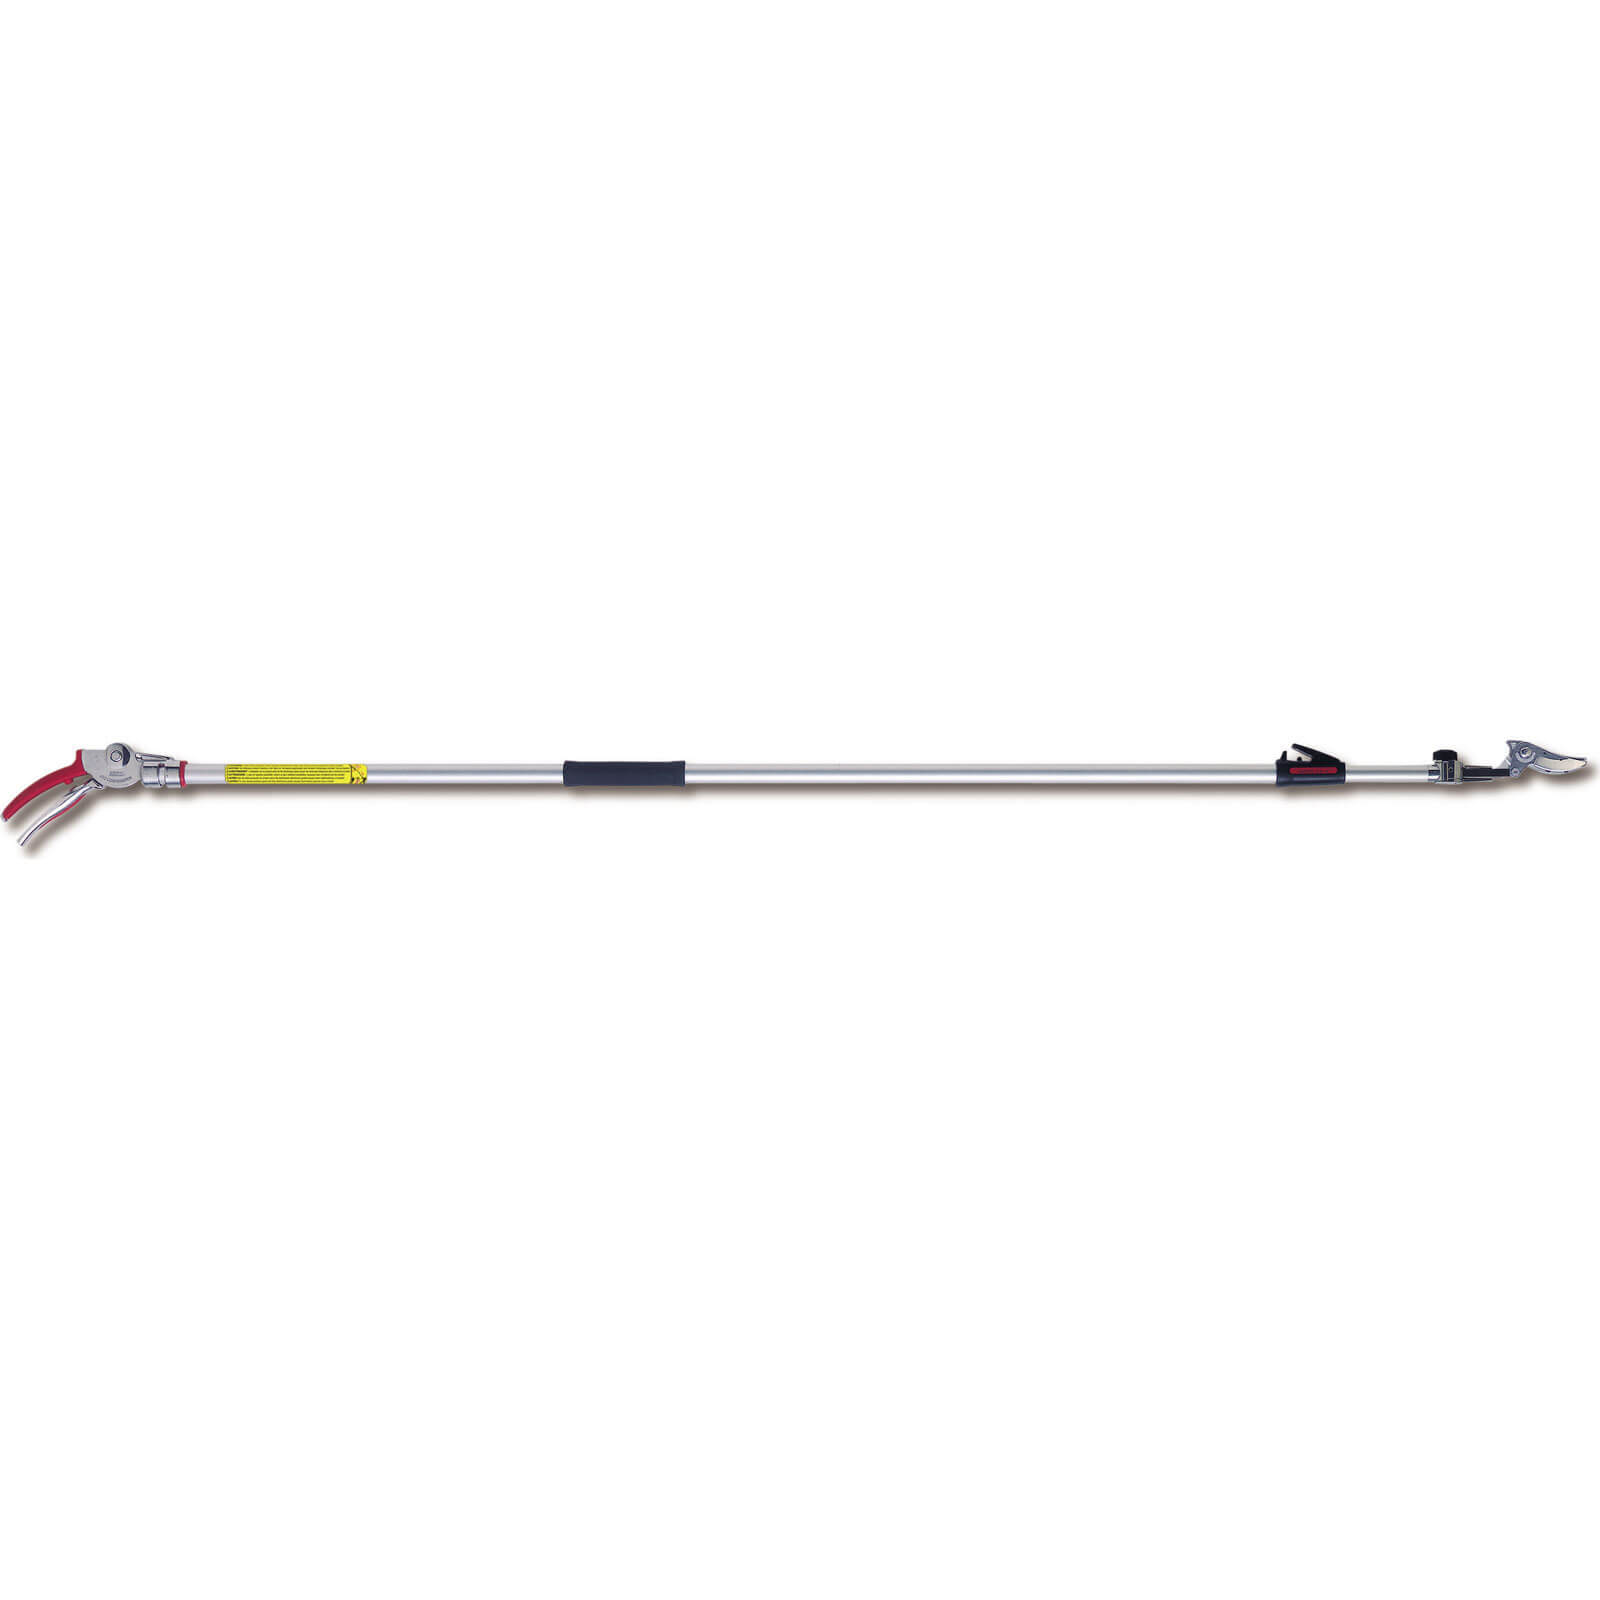 ARS Swing Head Telescopic Bypass Tree Pruner with Small Cut & Hold Blade Extends 1800 - 3000mm